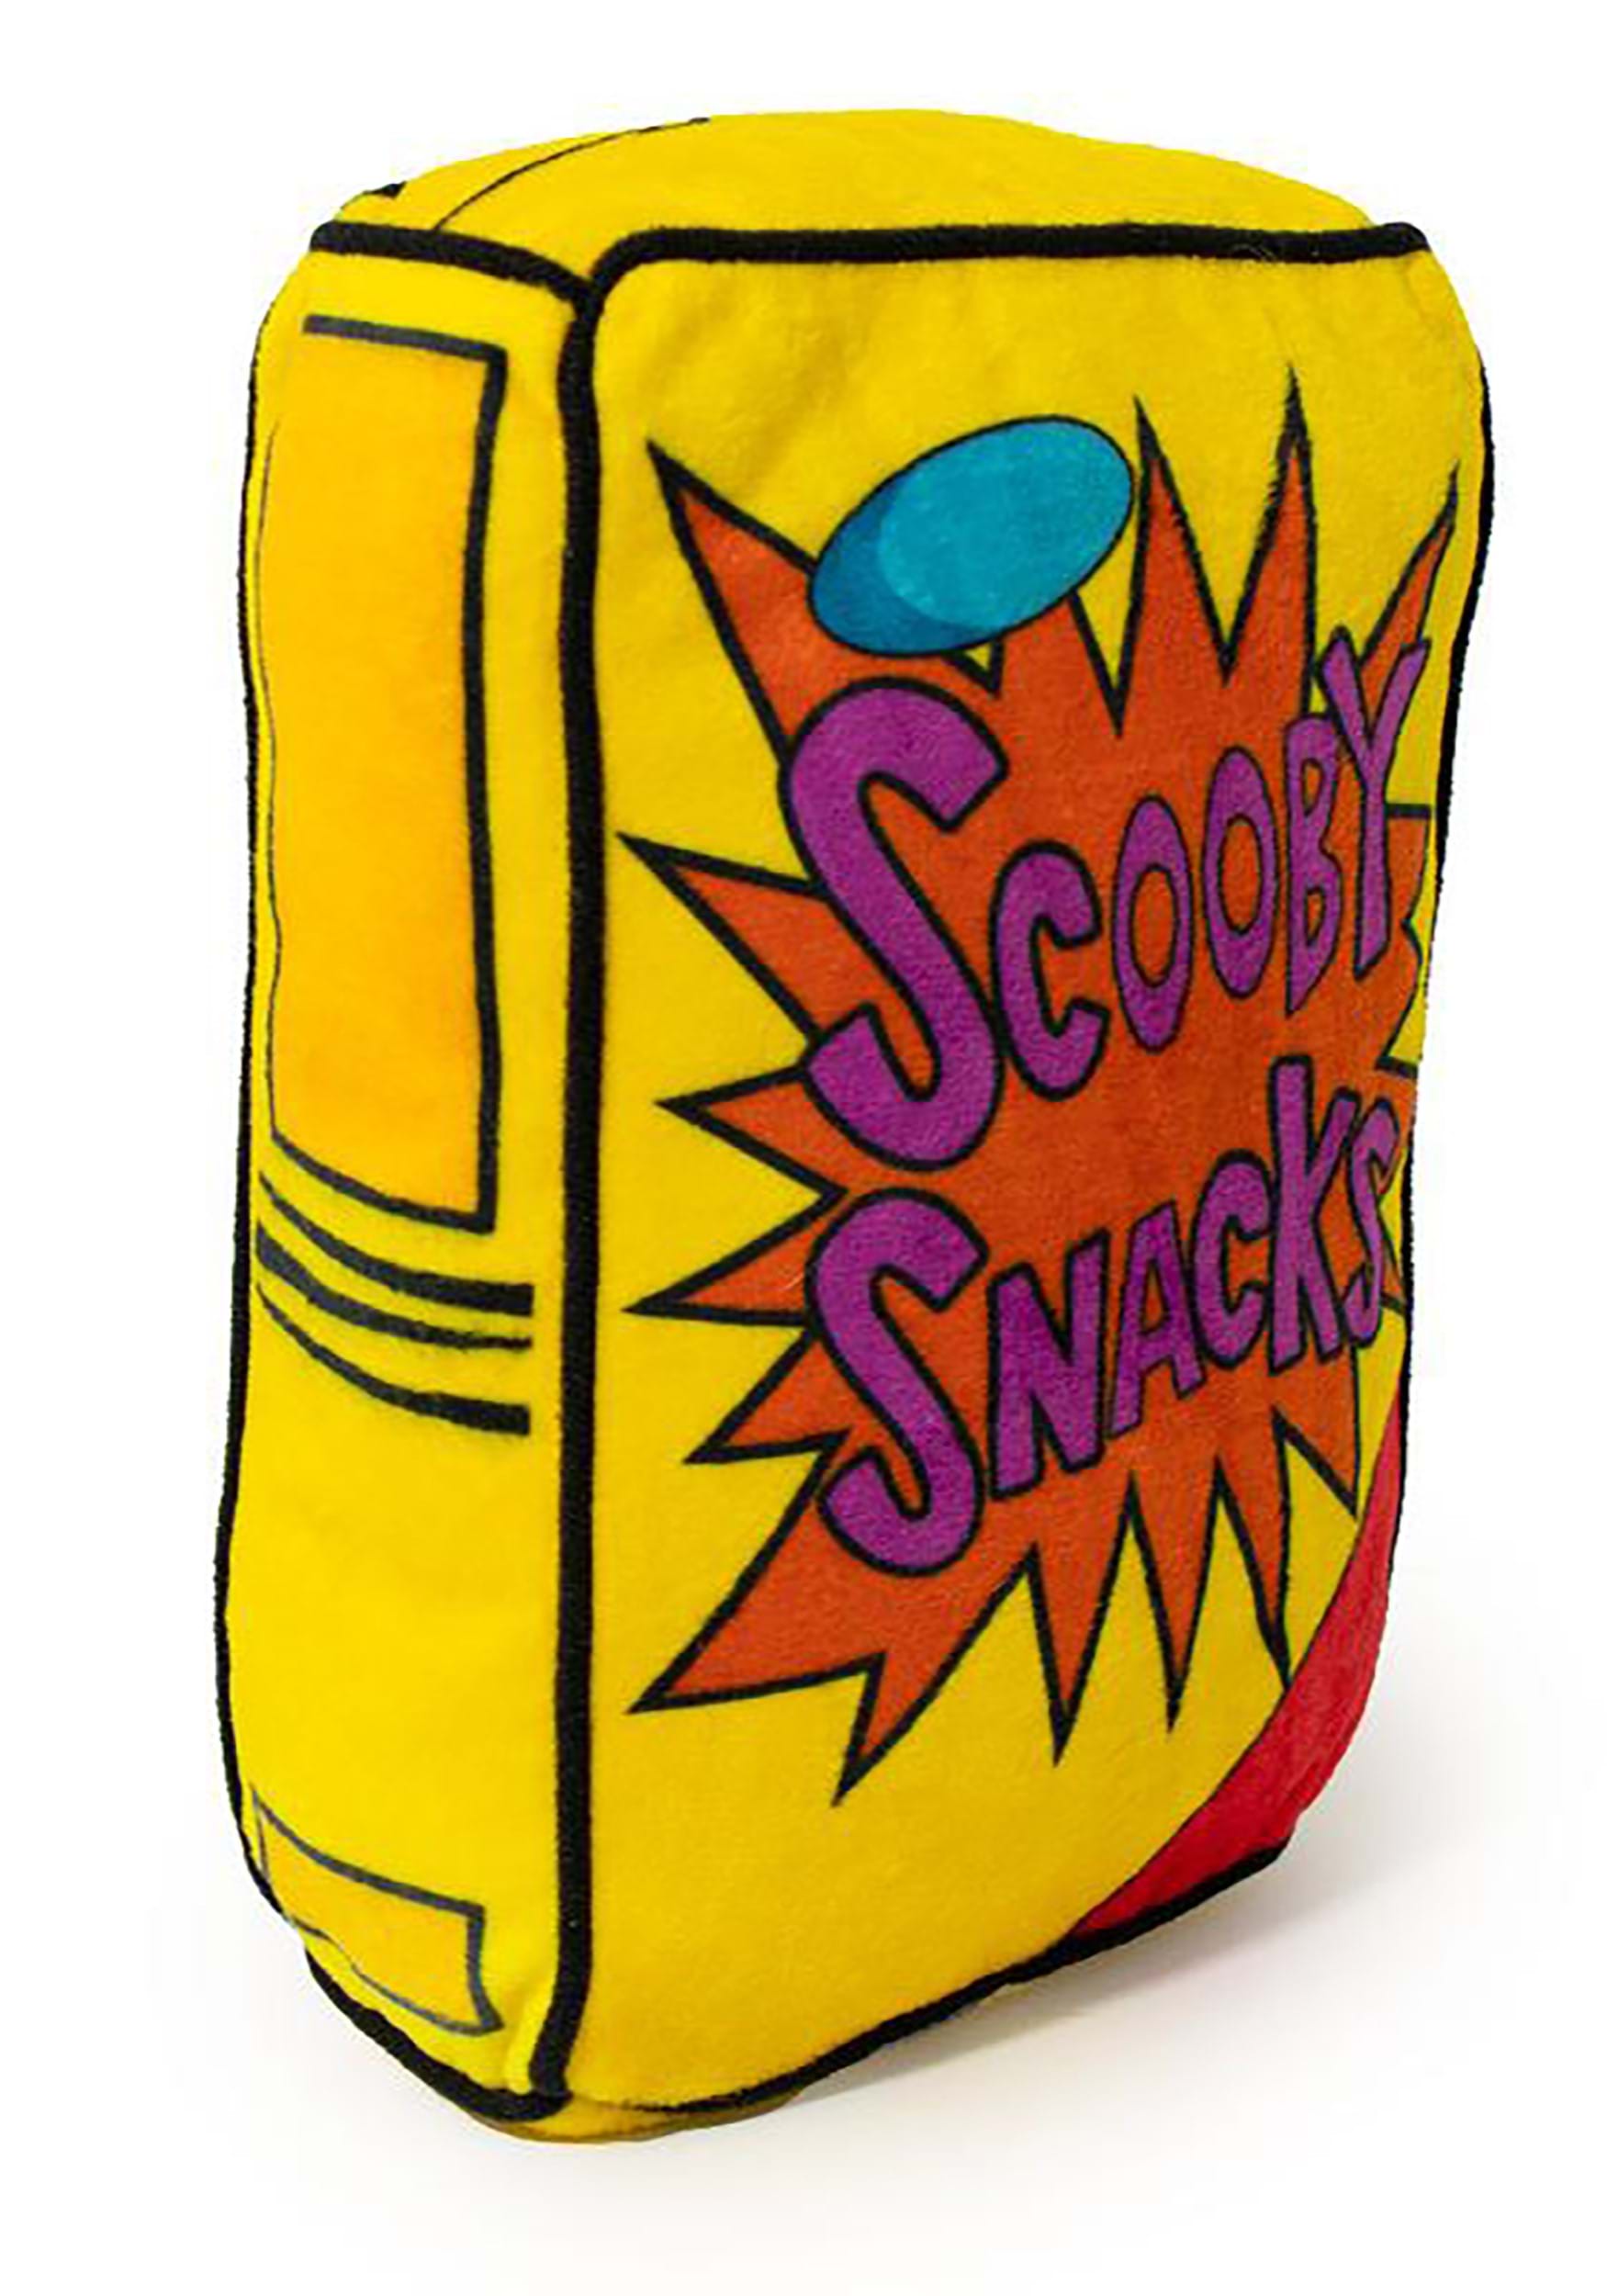 Scooby-Doo Lunchbox Mystery Machine Lunch Bag Bottle and Snack Pot Set One  Size